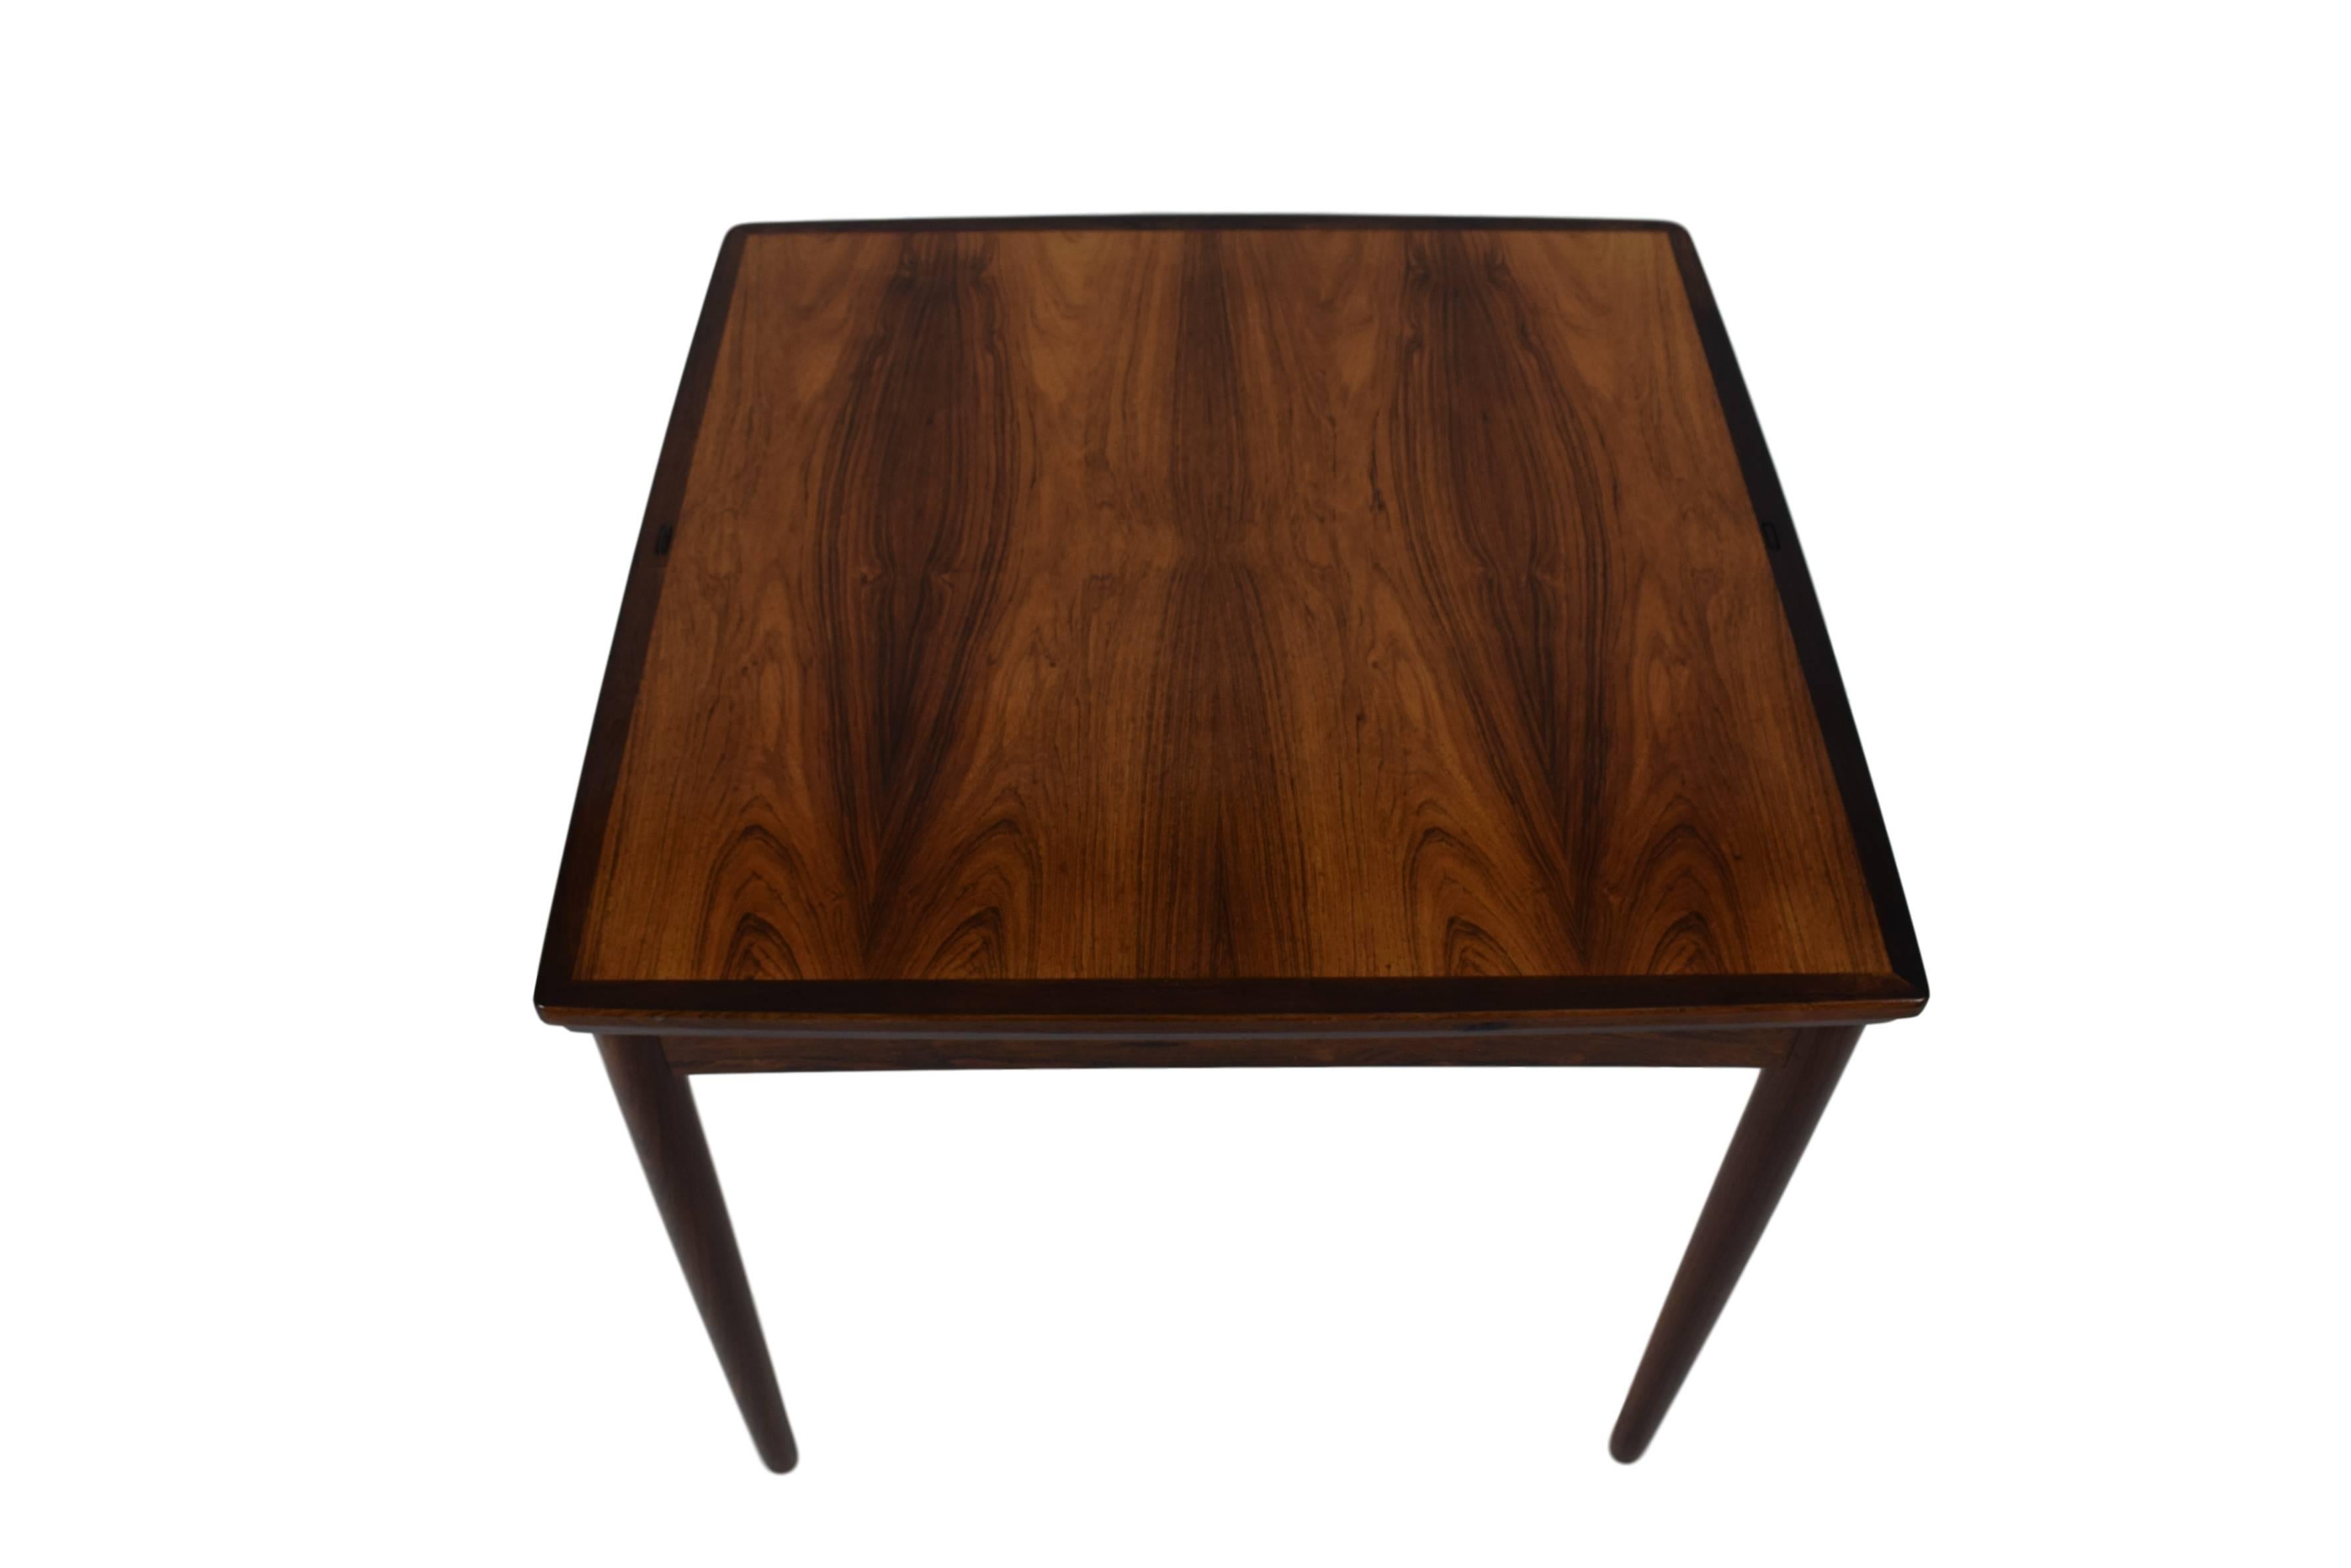 Scandinavian Modern Danish Midcentury Games Table / Dining Table by Poul Hundevad, Reversible Top